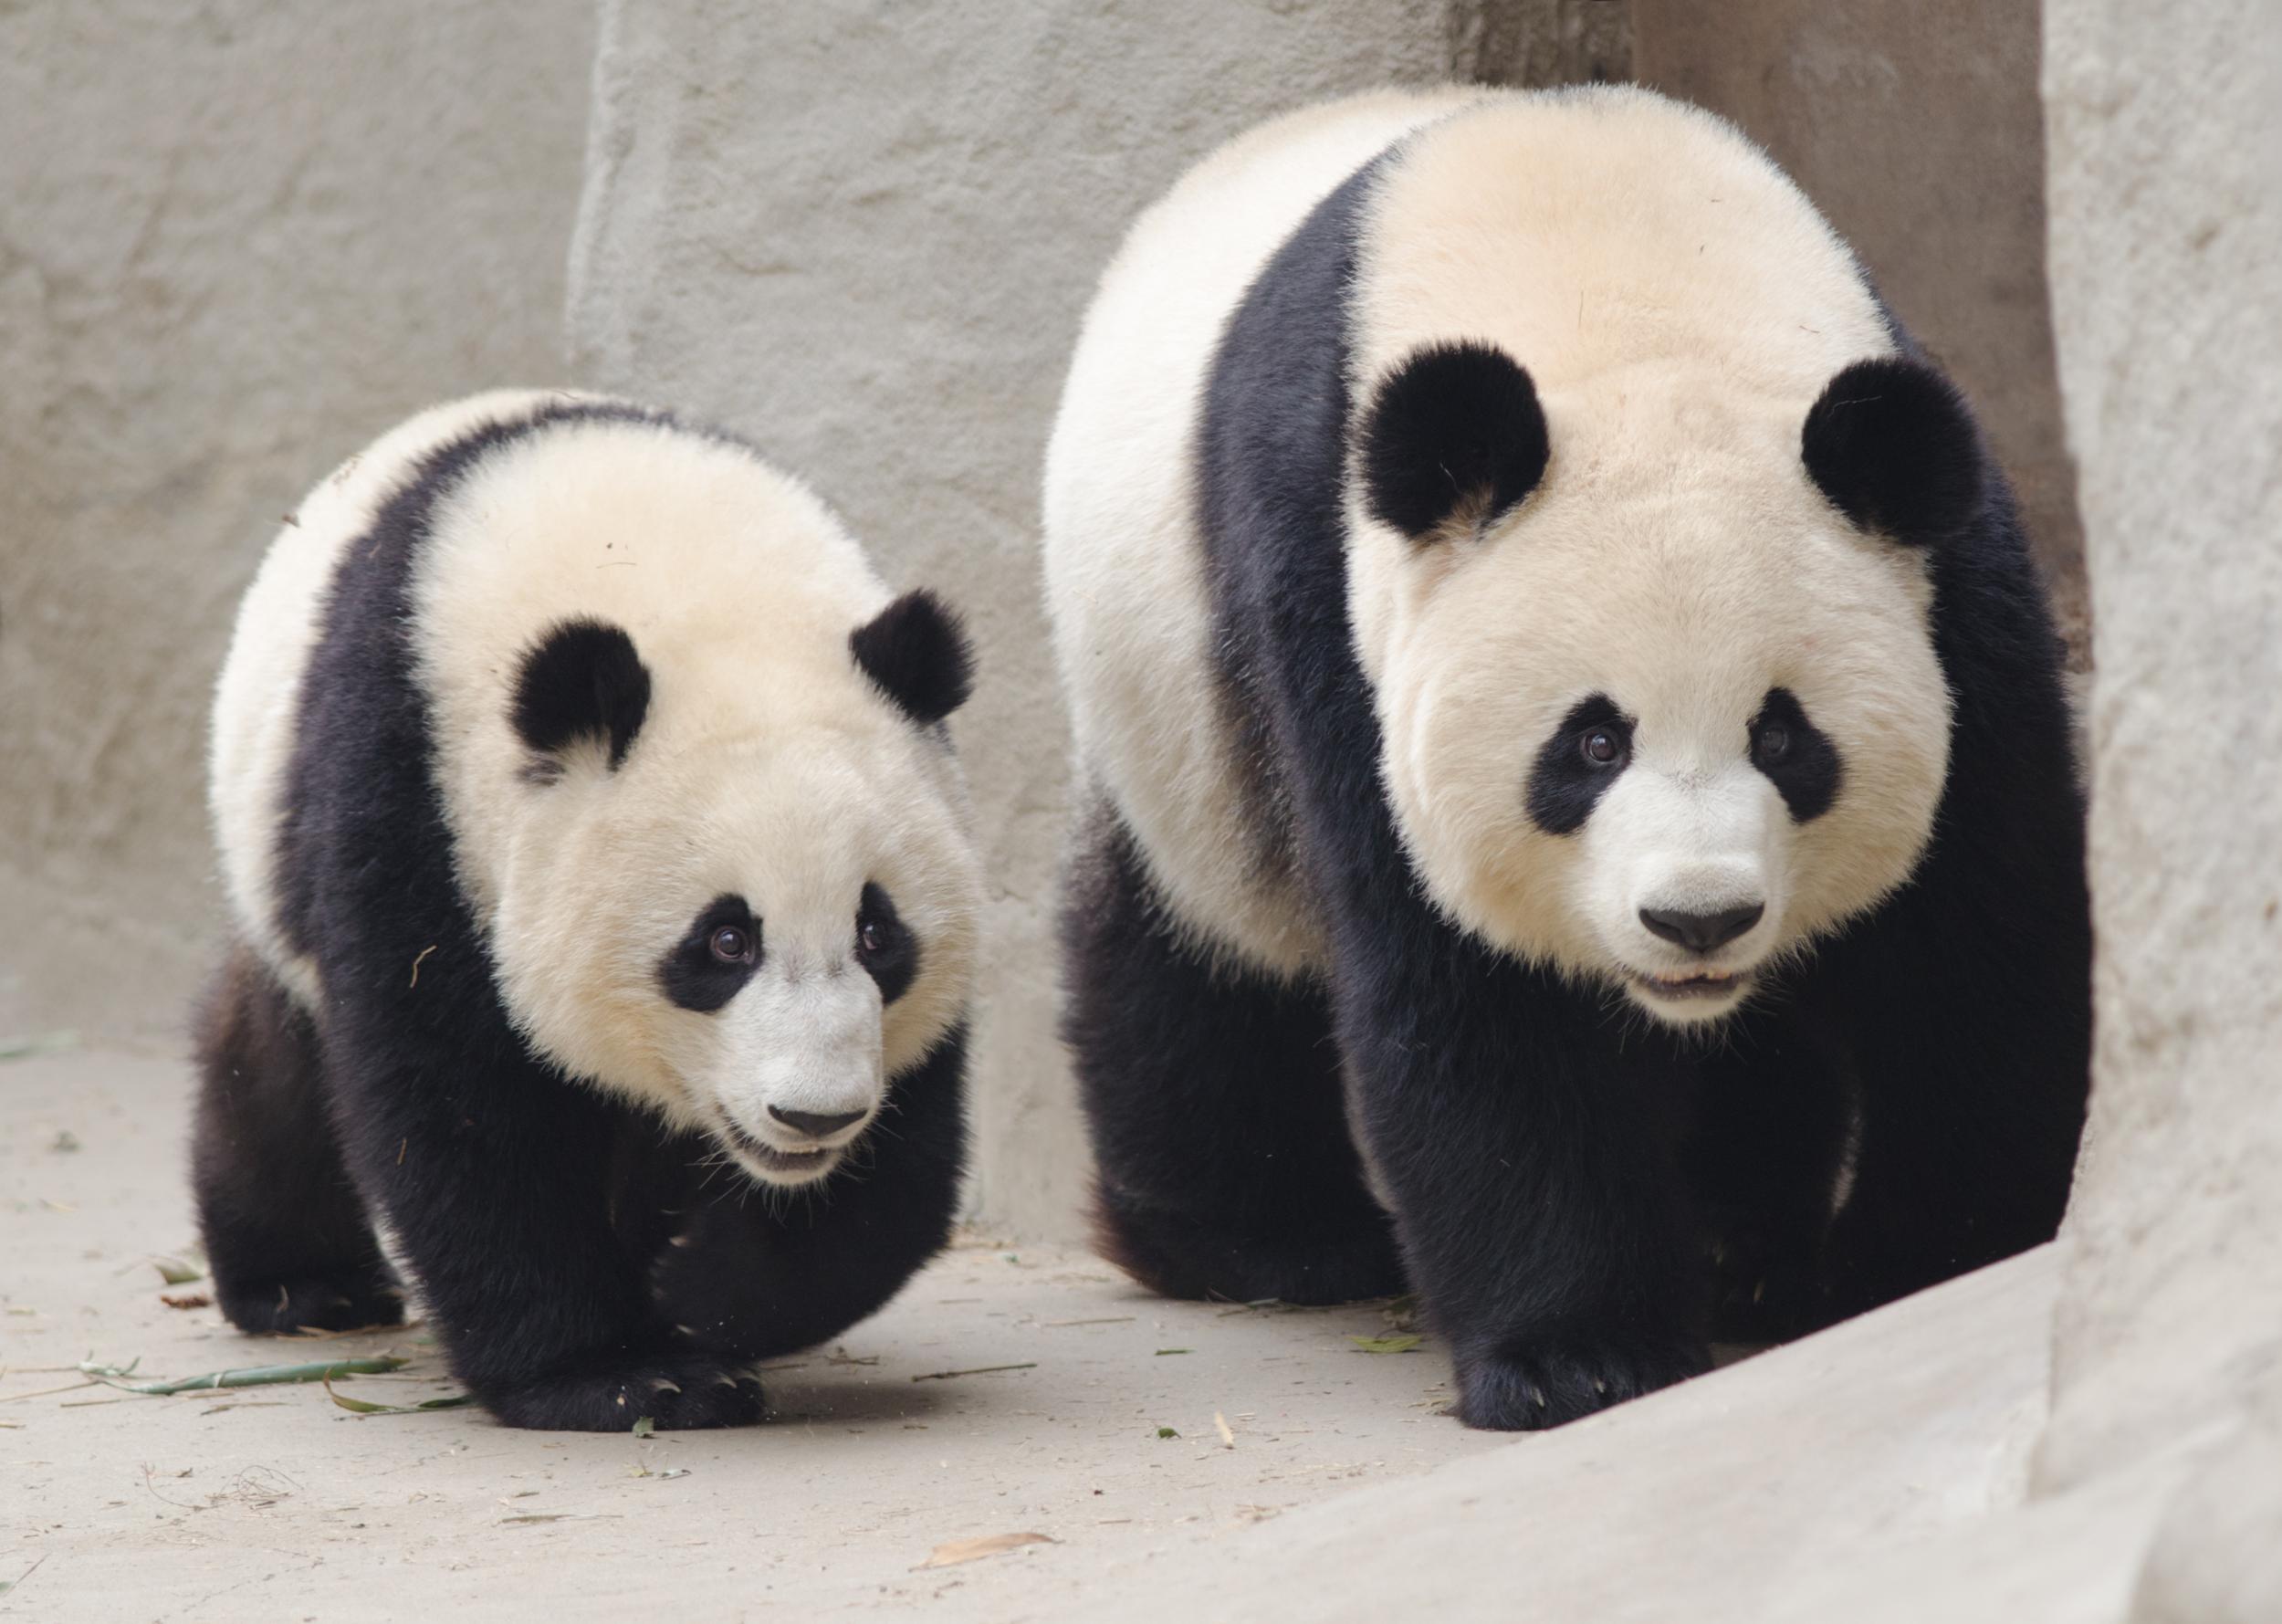 A panda cub with its mother (iStock)